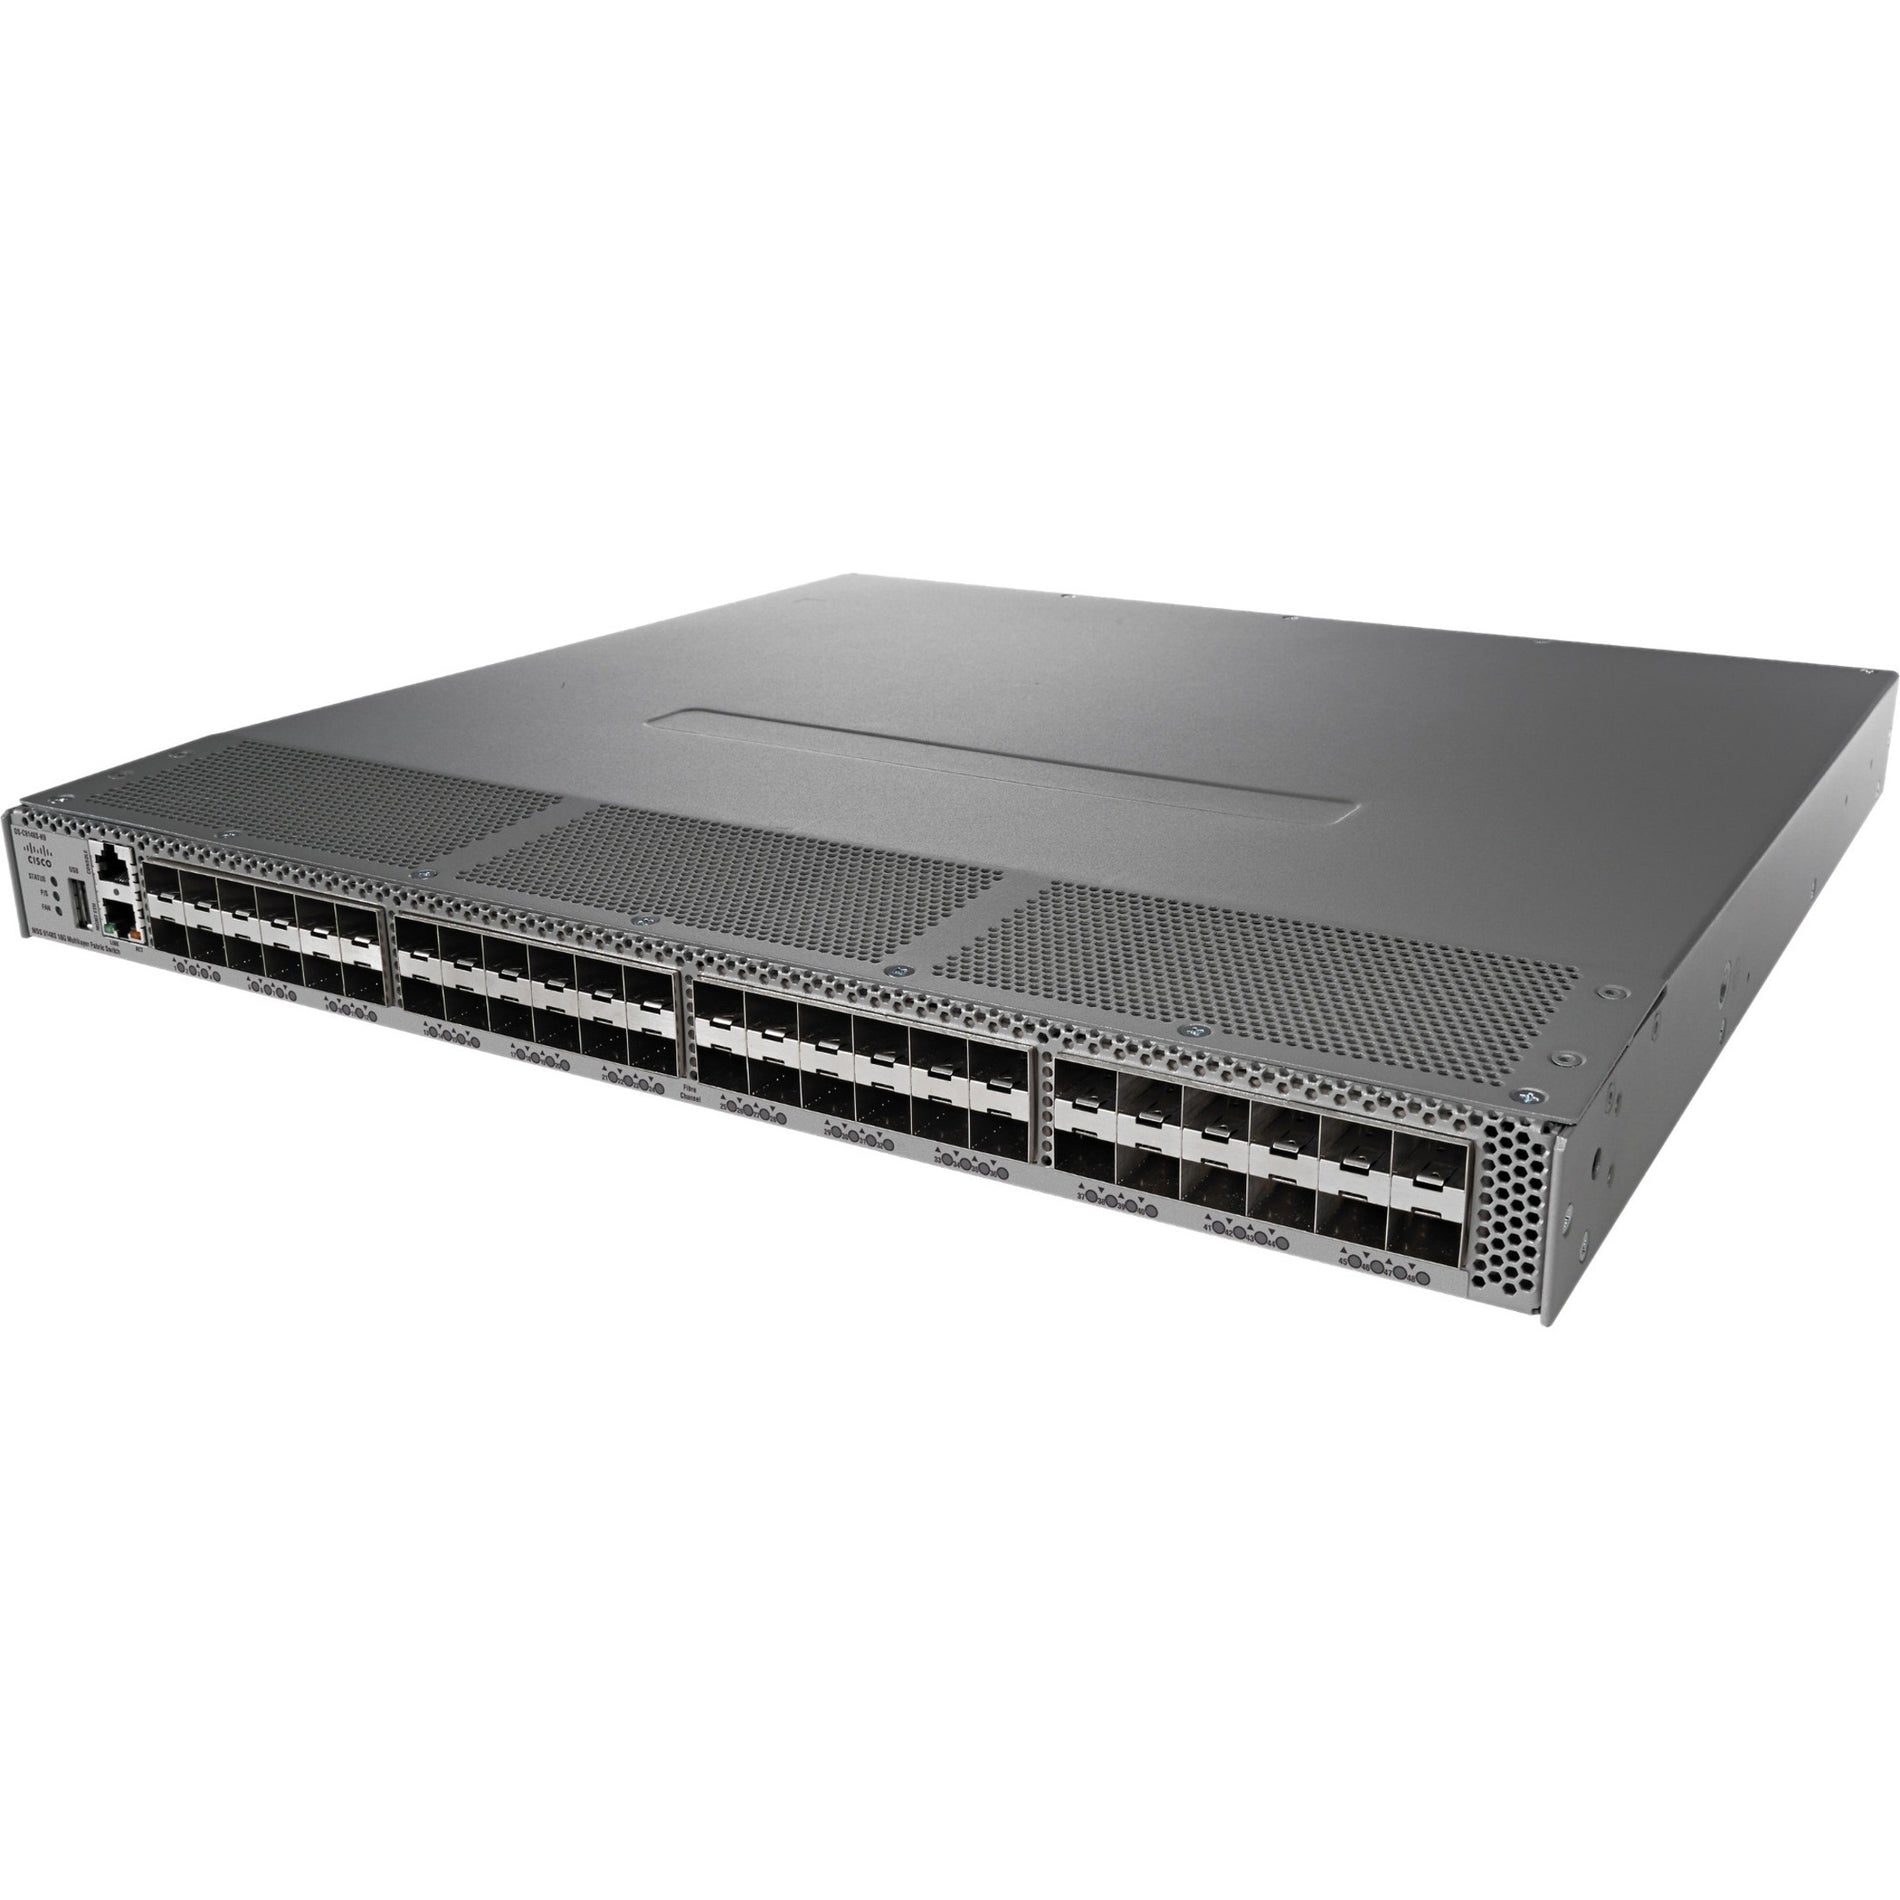 Cisco DS-C9148S-12PK9 MDS 9148S 16G FC Switch with 12 Active Ports, Fibre Channel Switch